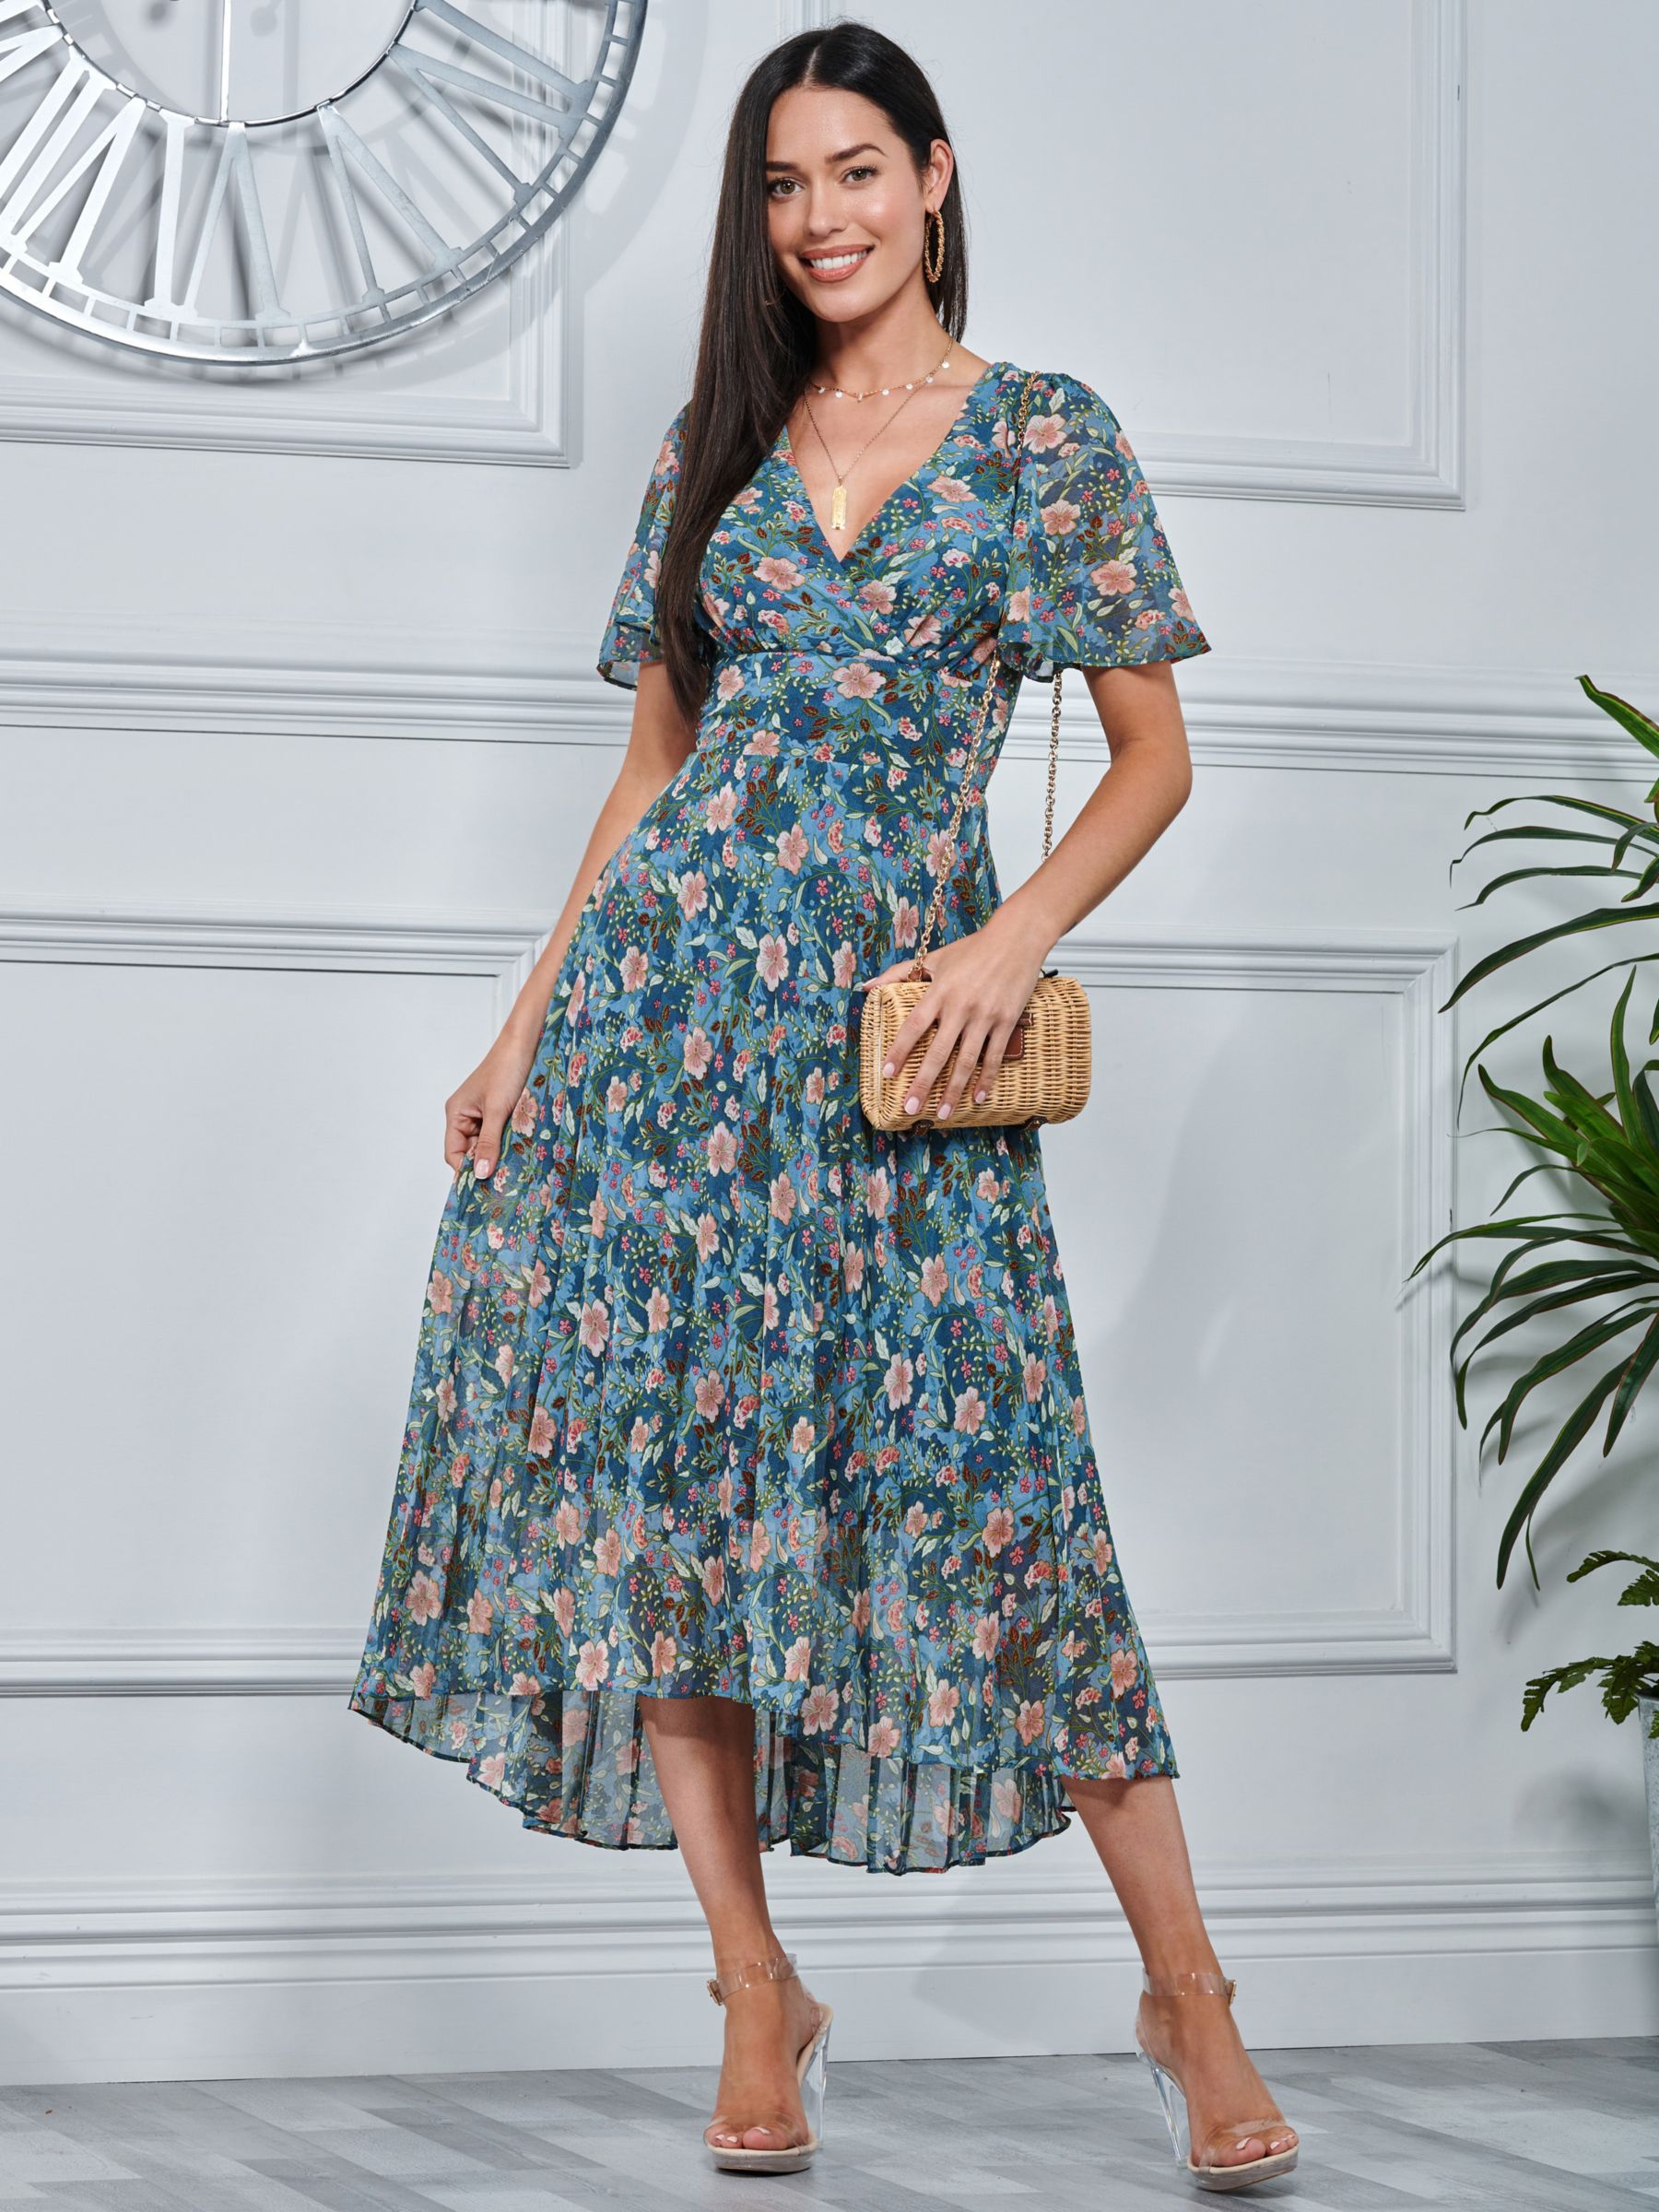 Buy Jolie Moi Pleated Chiffon High Low Midi Dress, Teal Floral Online at johnlewis.com